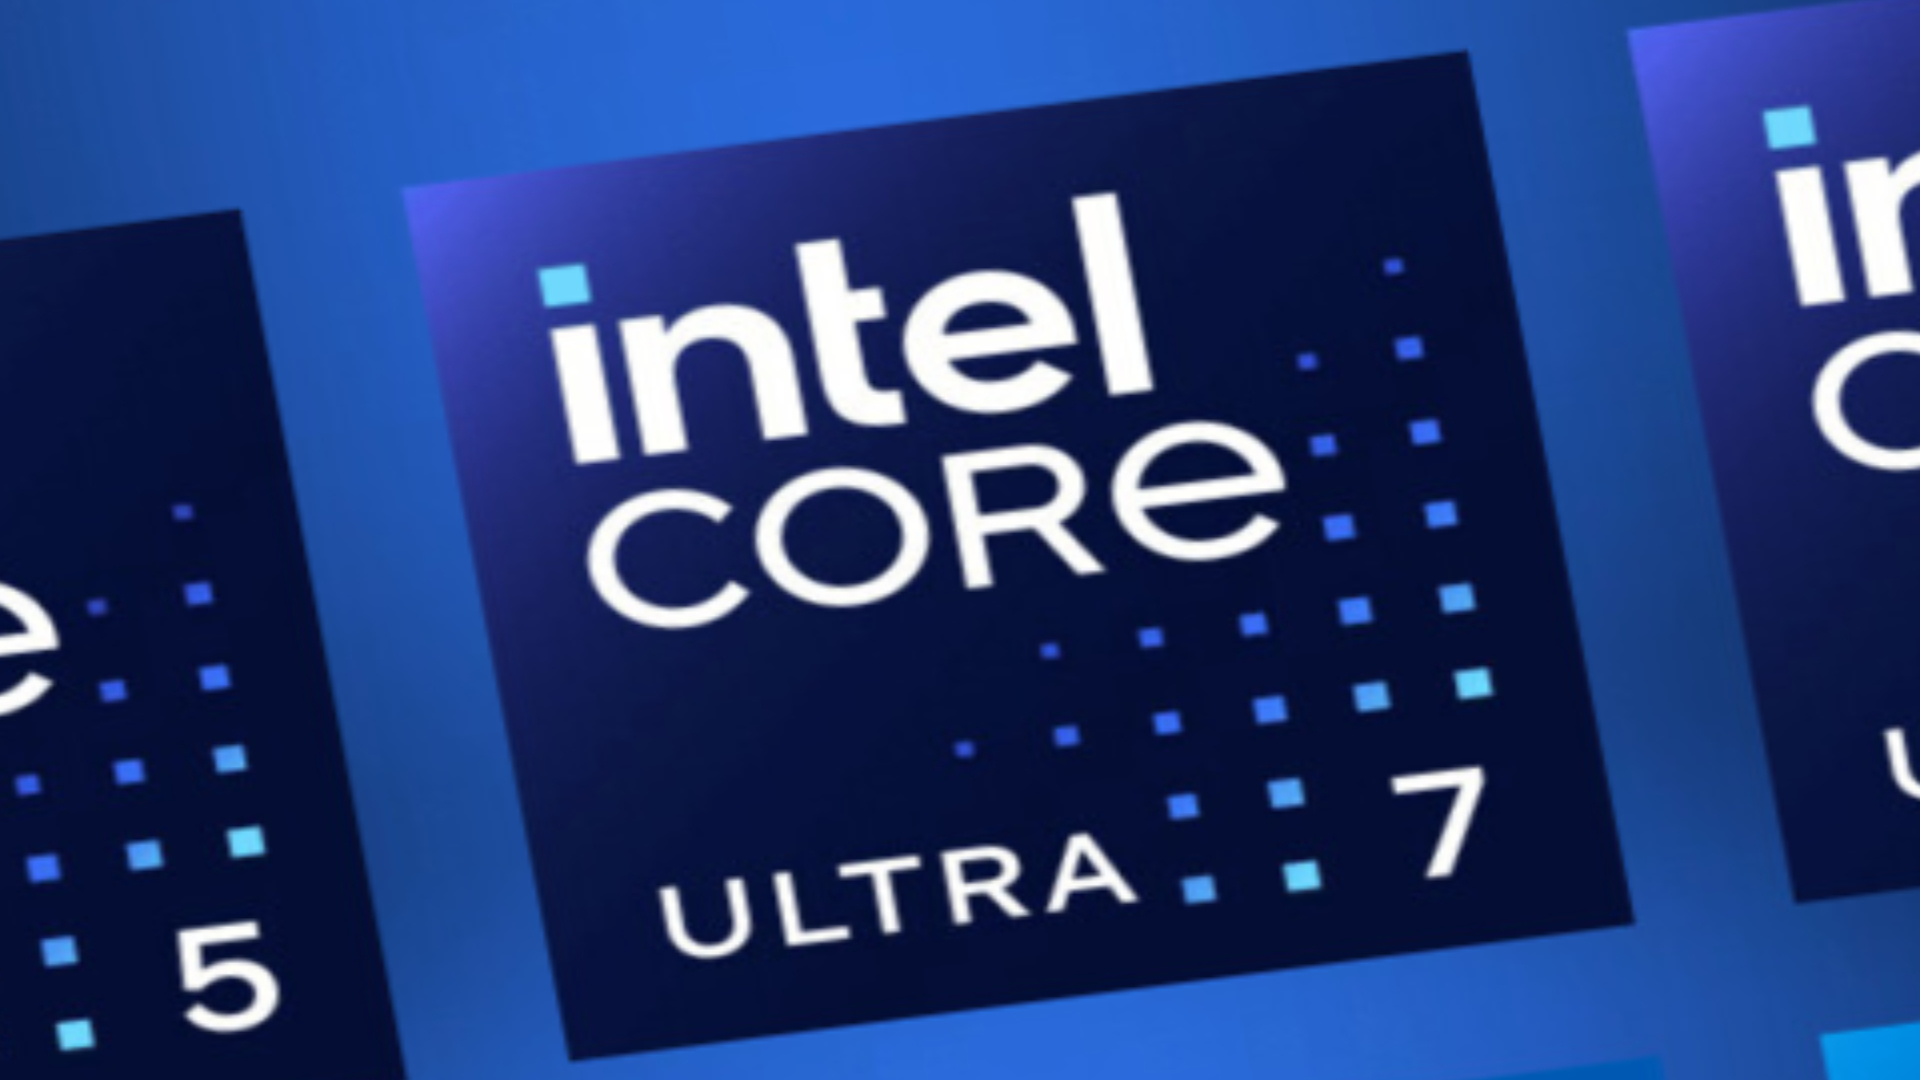 Farewell to the Intel i series: Introducing Intel Ultra